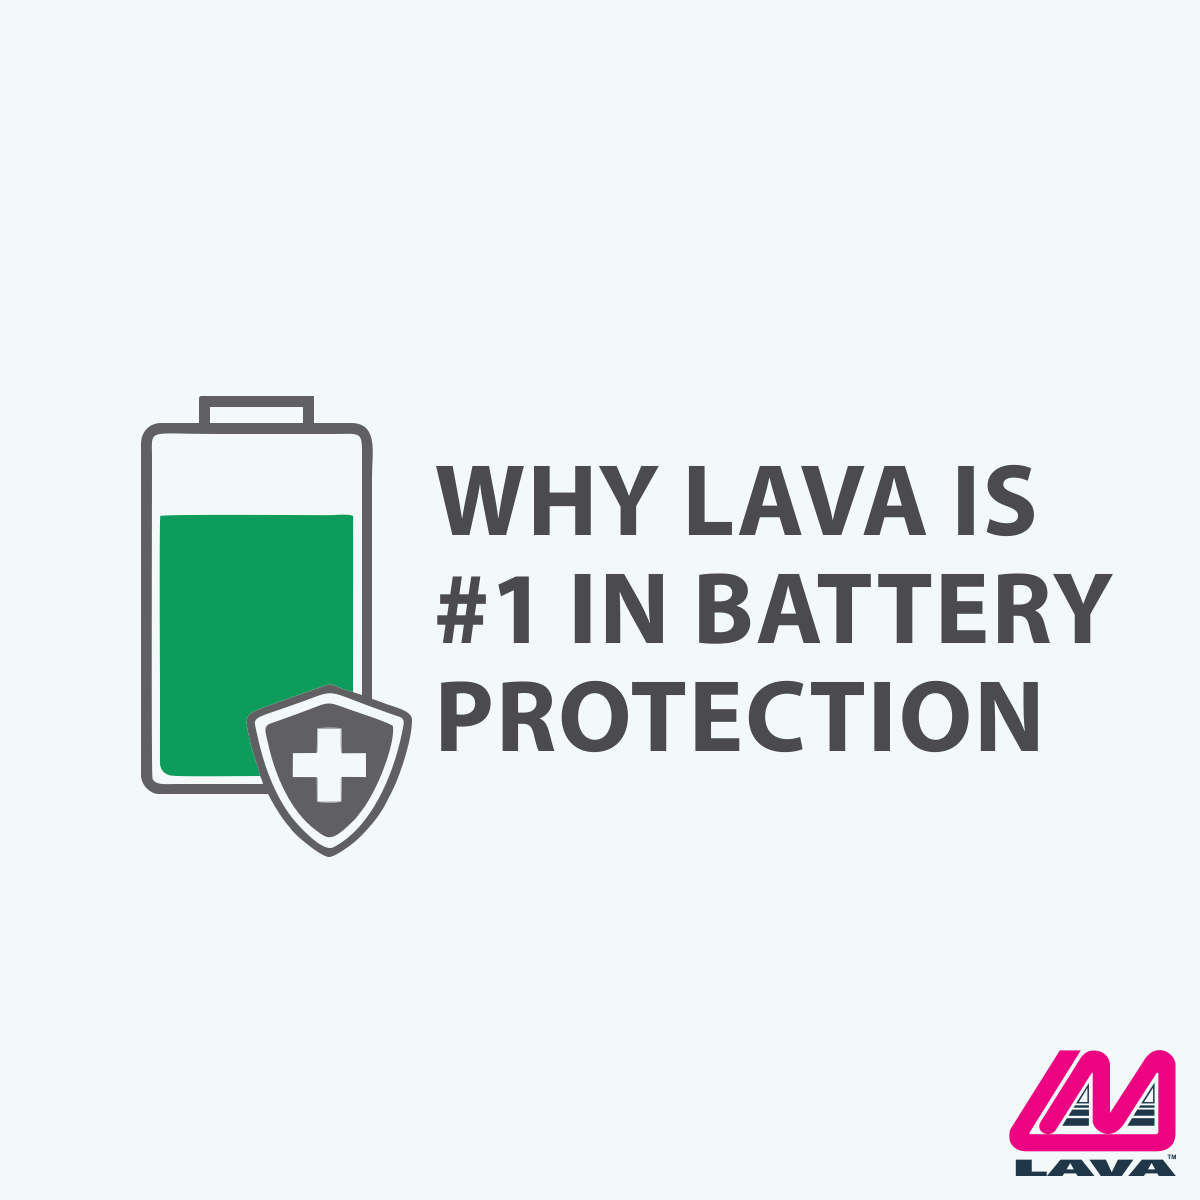 LAVA is number one in Battery Protection